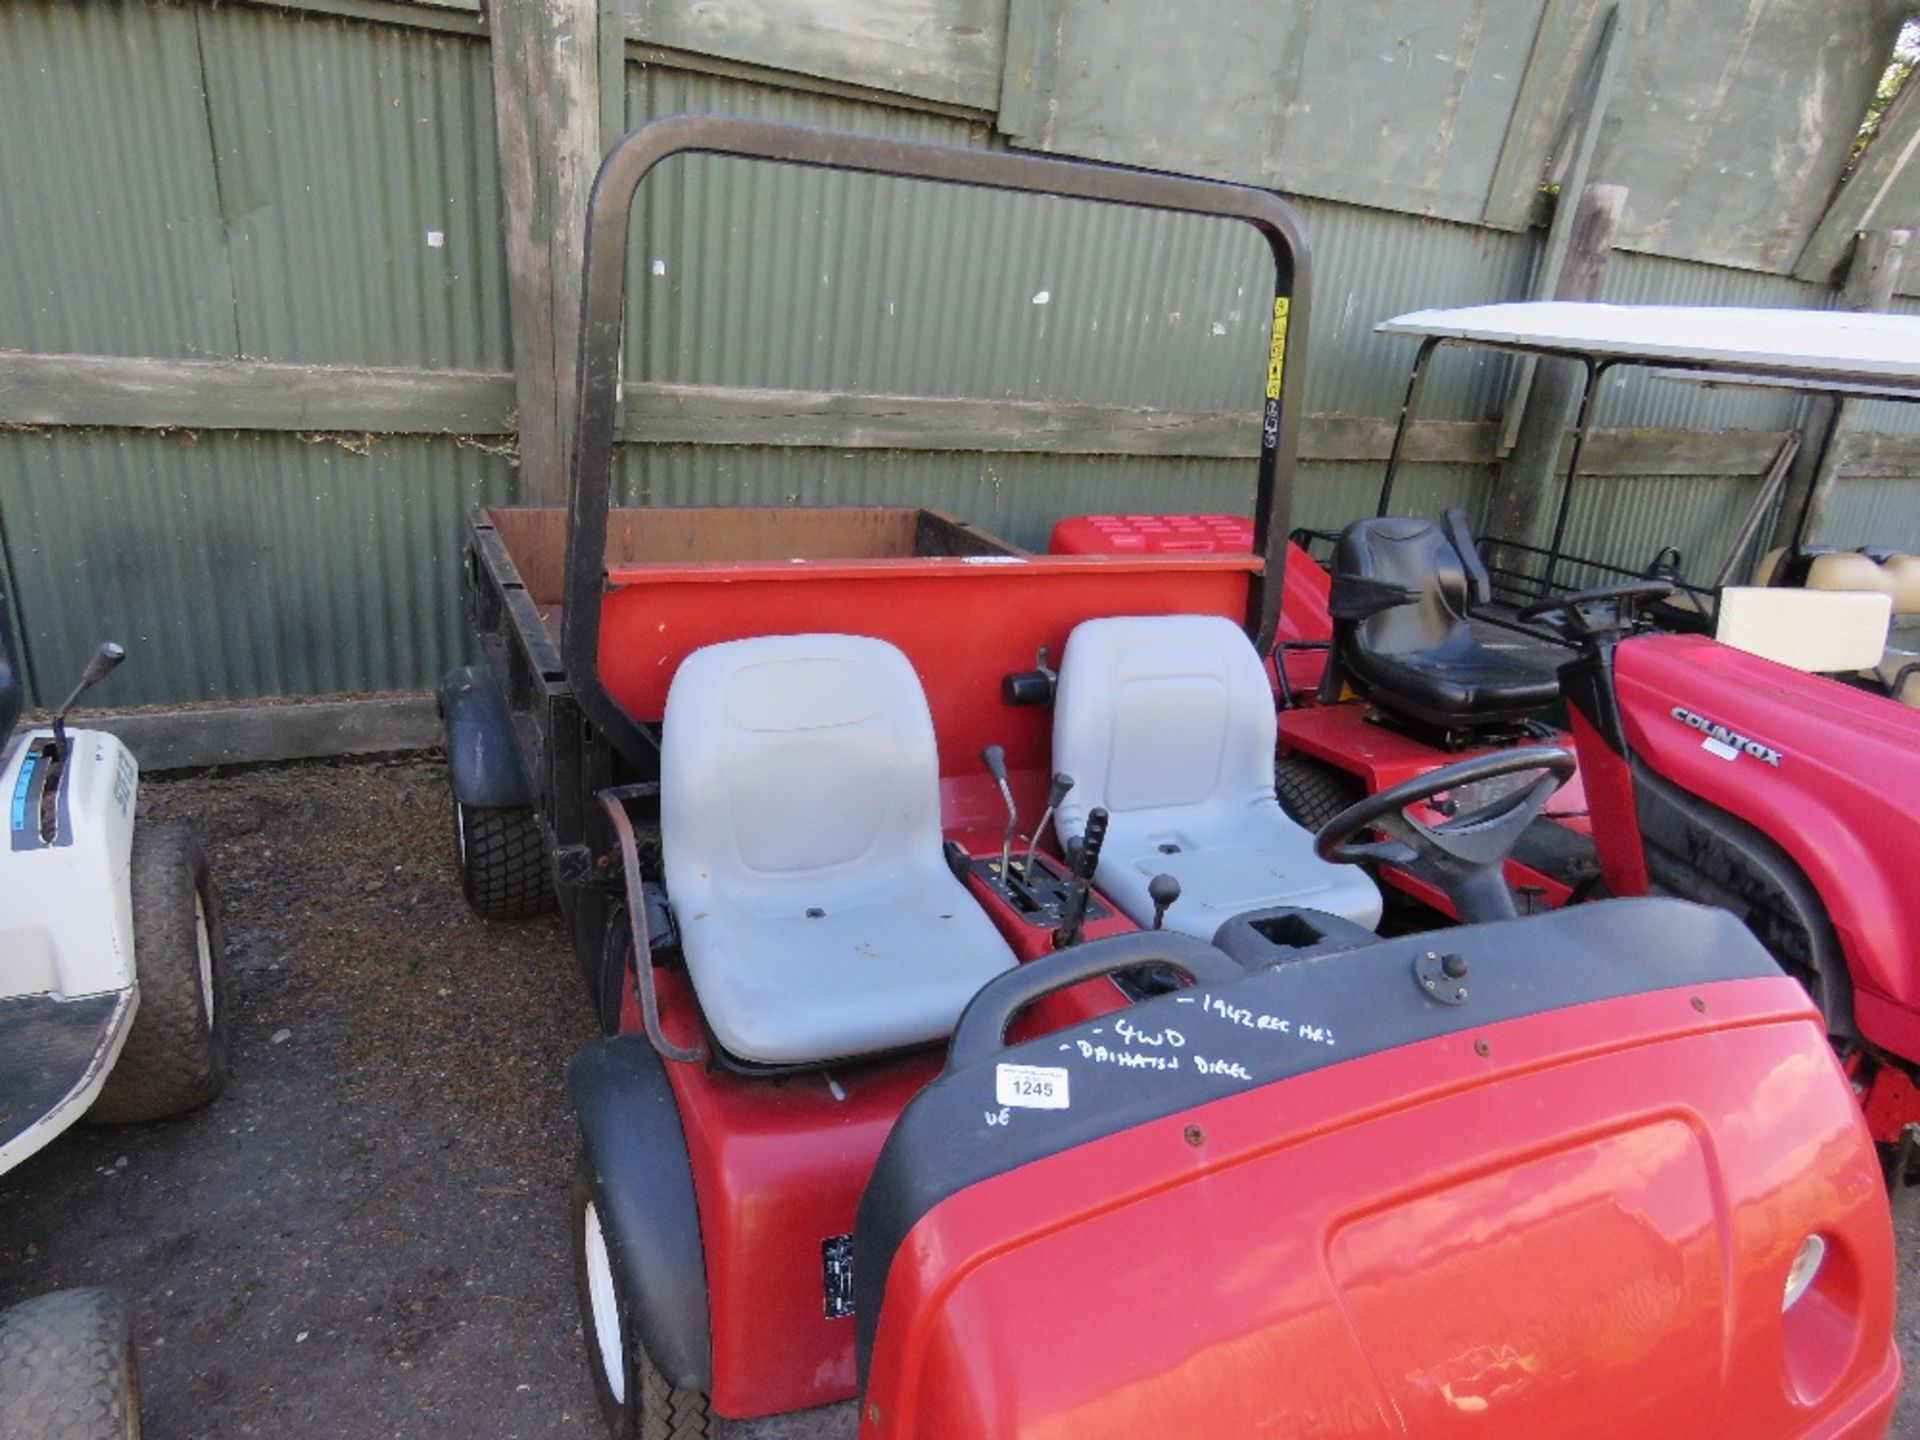 TORO WORMAN 2WD UTILITY VEHICLE. YEAR 2003 APPROX. WHEN TESTED WAS SEEN TO DRIVE, STEER AND BRAKE AN - Image 2 of 6